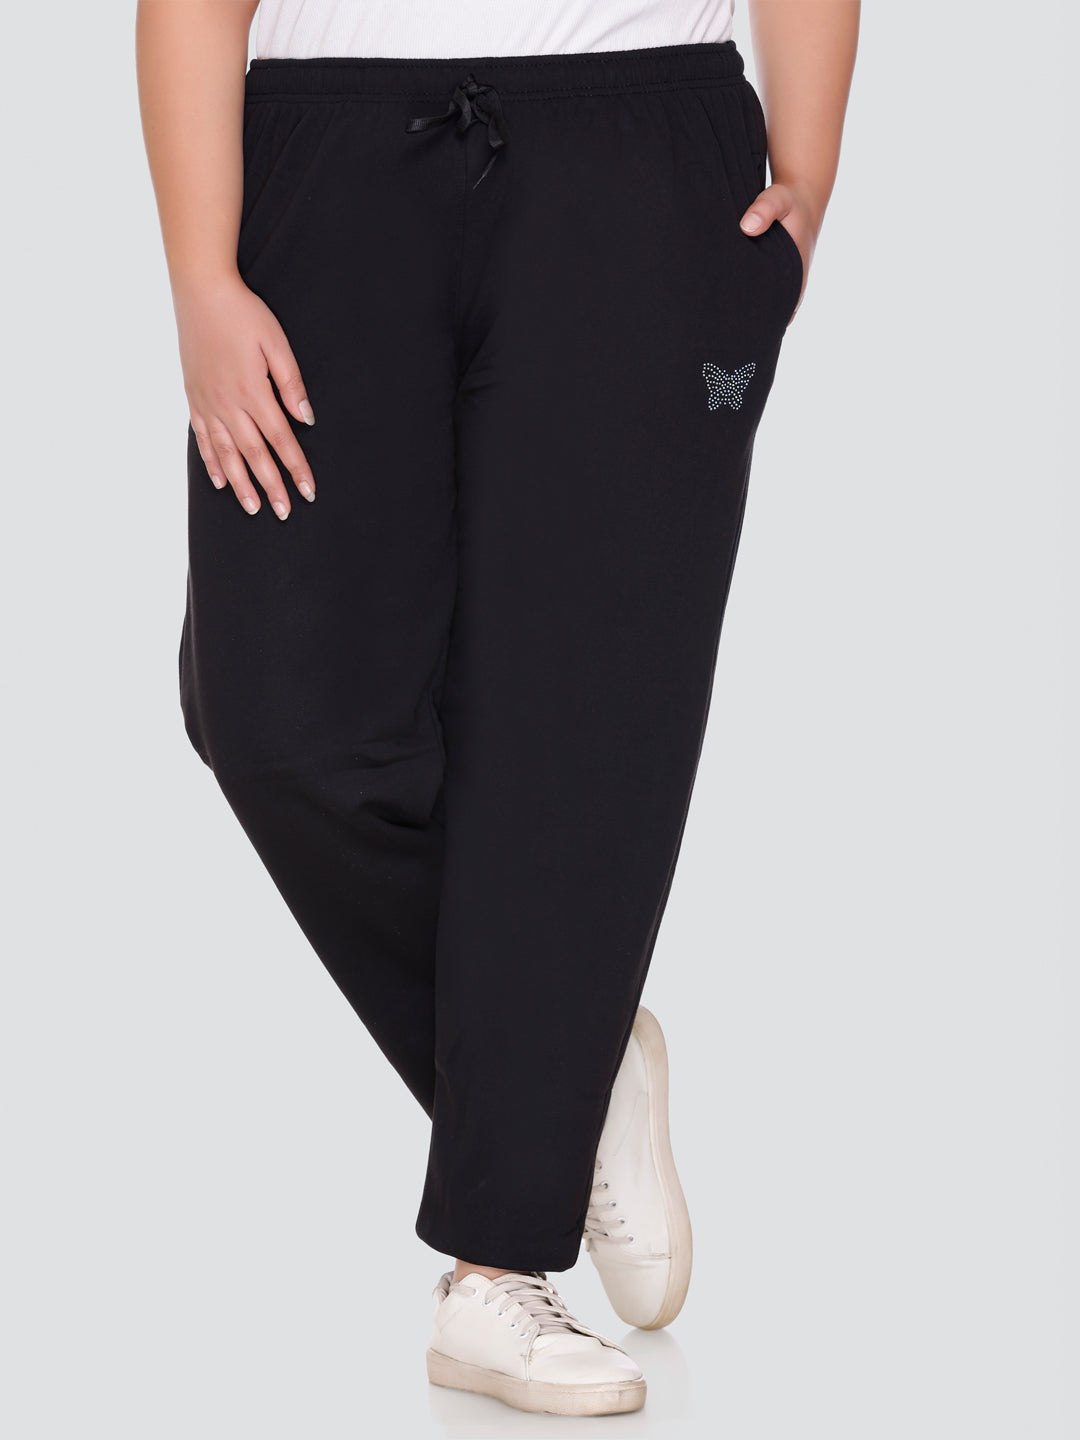 Women's Cotton Black Track Pant, Size: S-XXL at Rs 250/piece in New Delhi